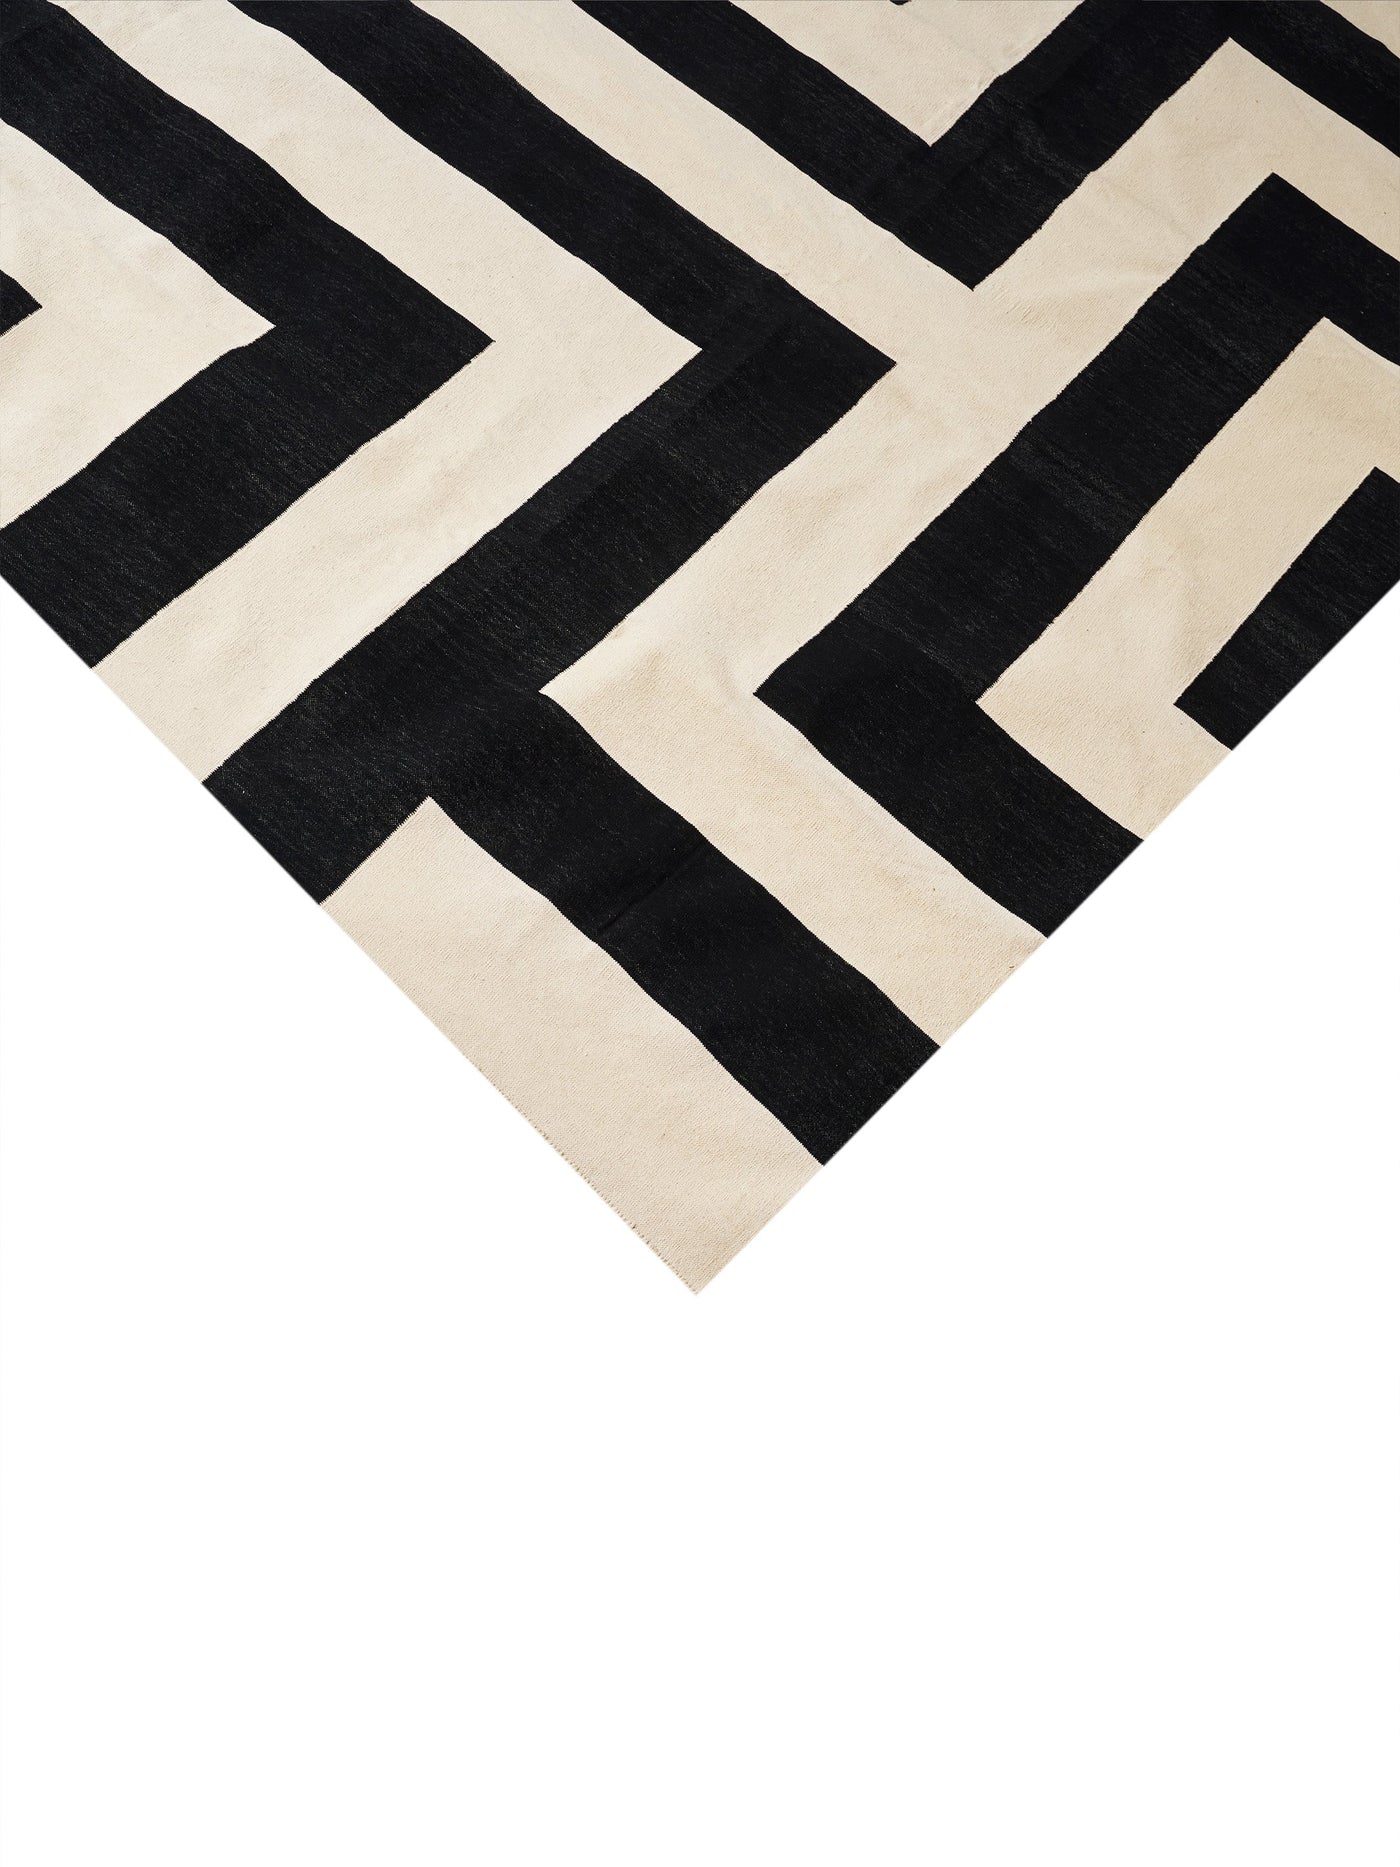 Cotton Dhurrie Bowie Rug 10x14 Feet in Black & White by Permanent Resident